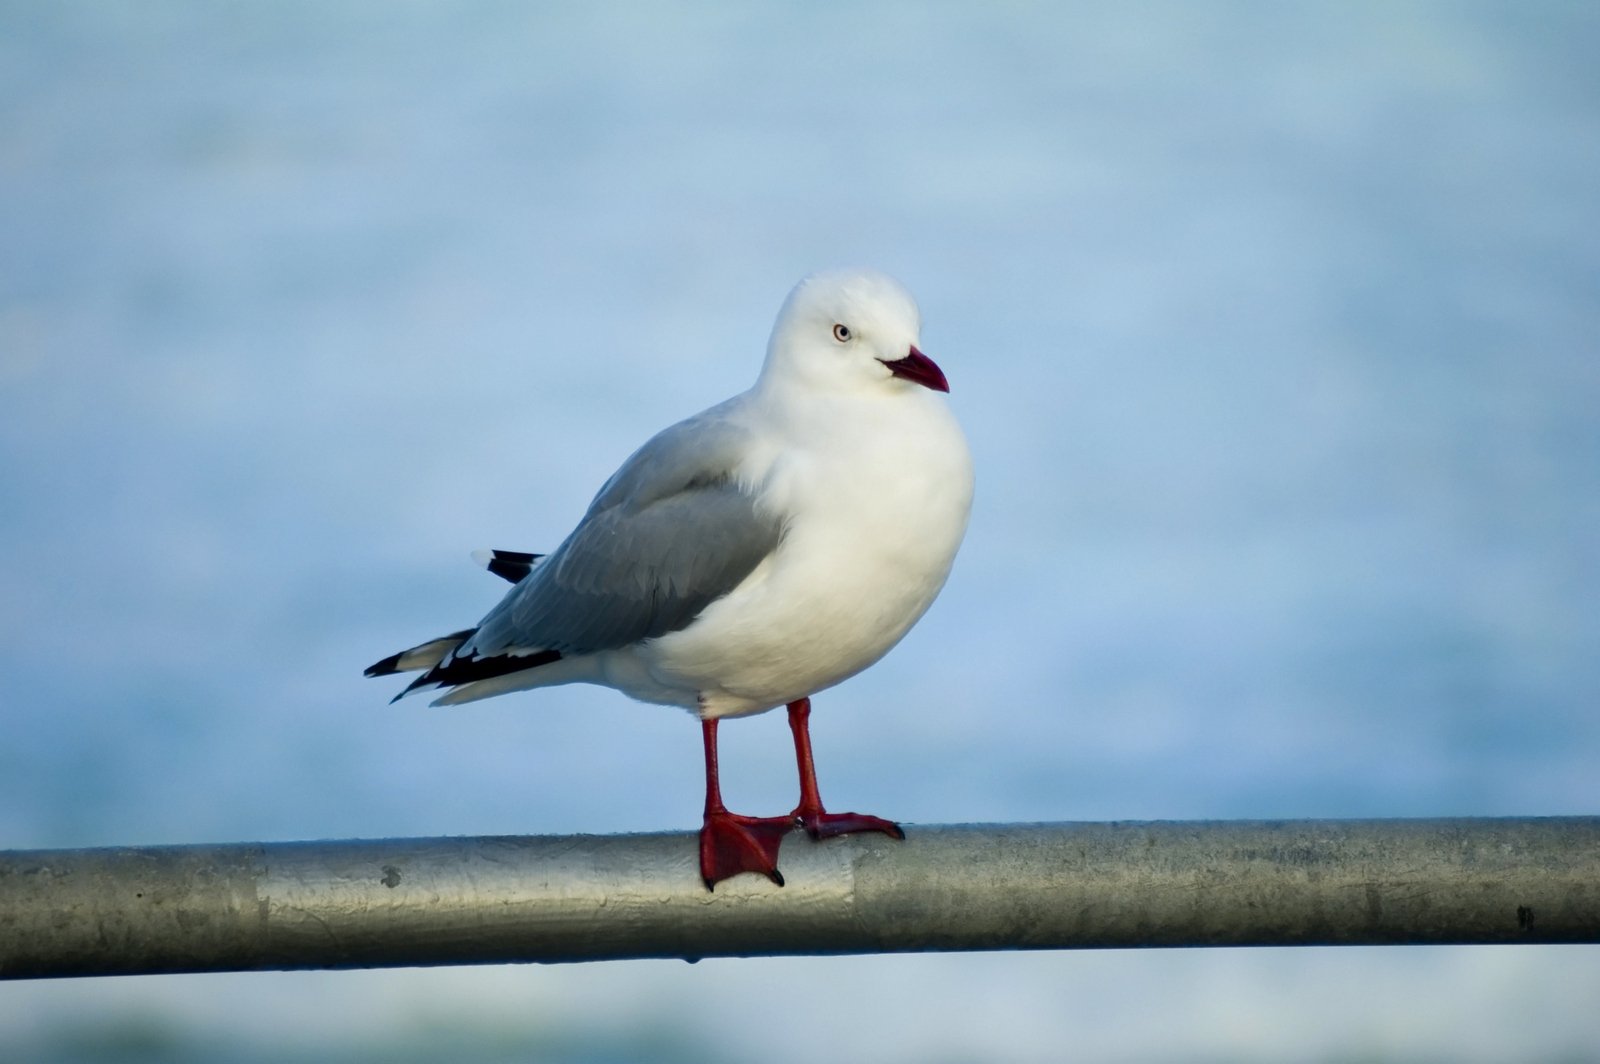 a white and grey seagull standing on top of a metal rail